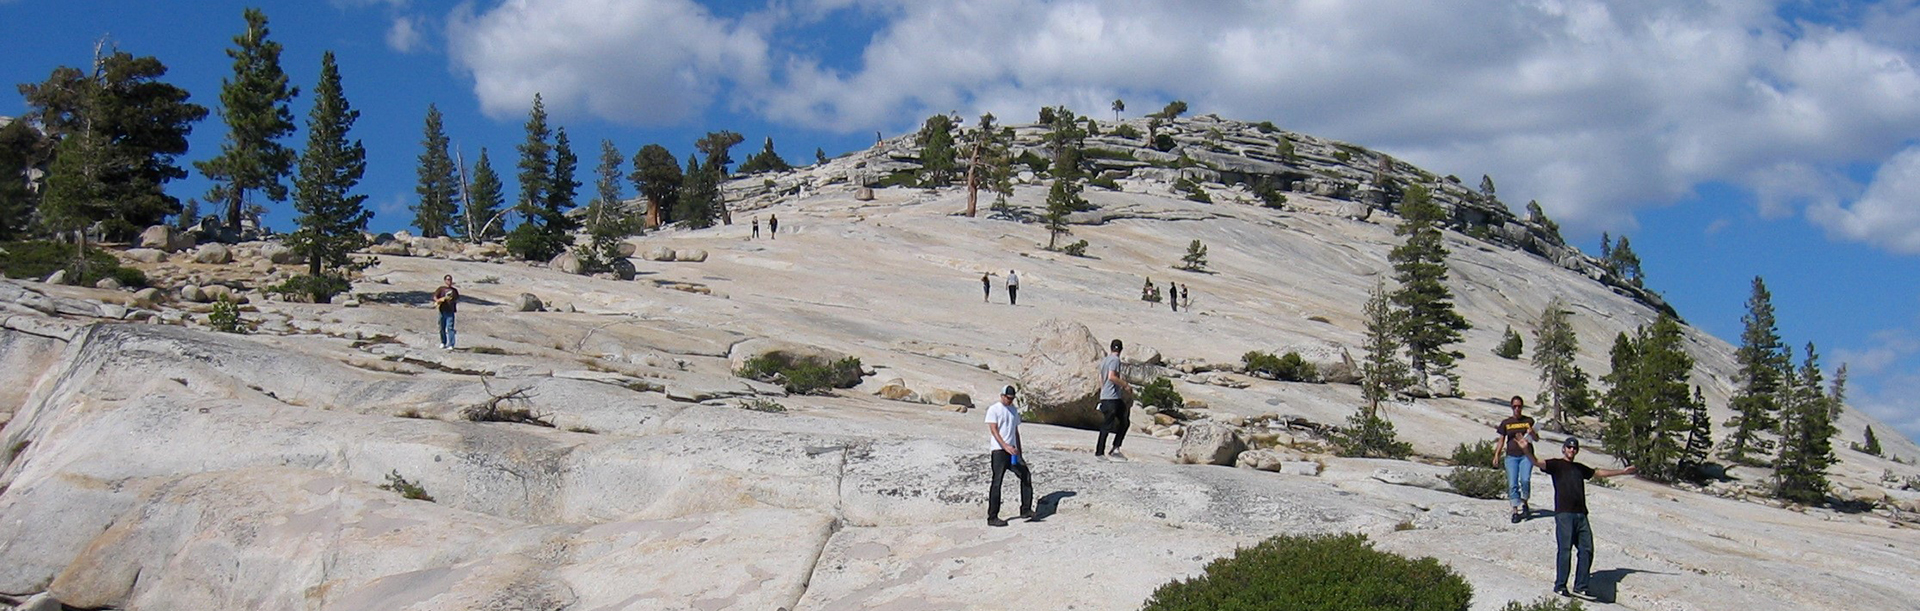 Students climbing on large granite formation